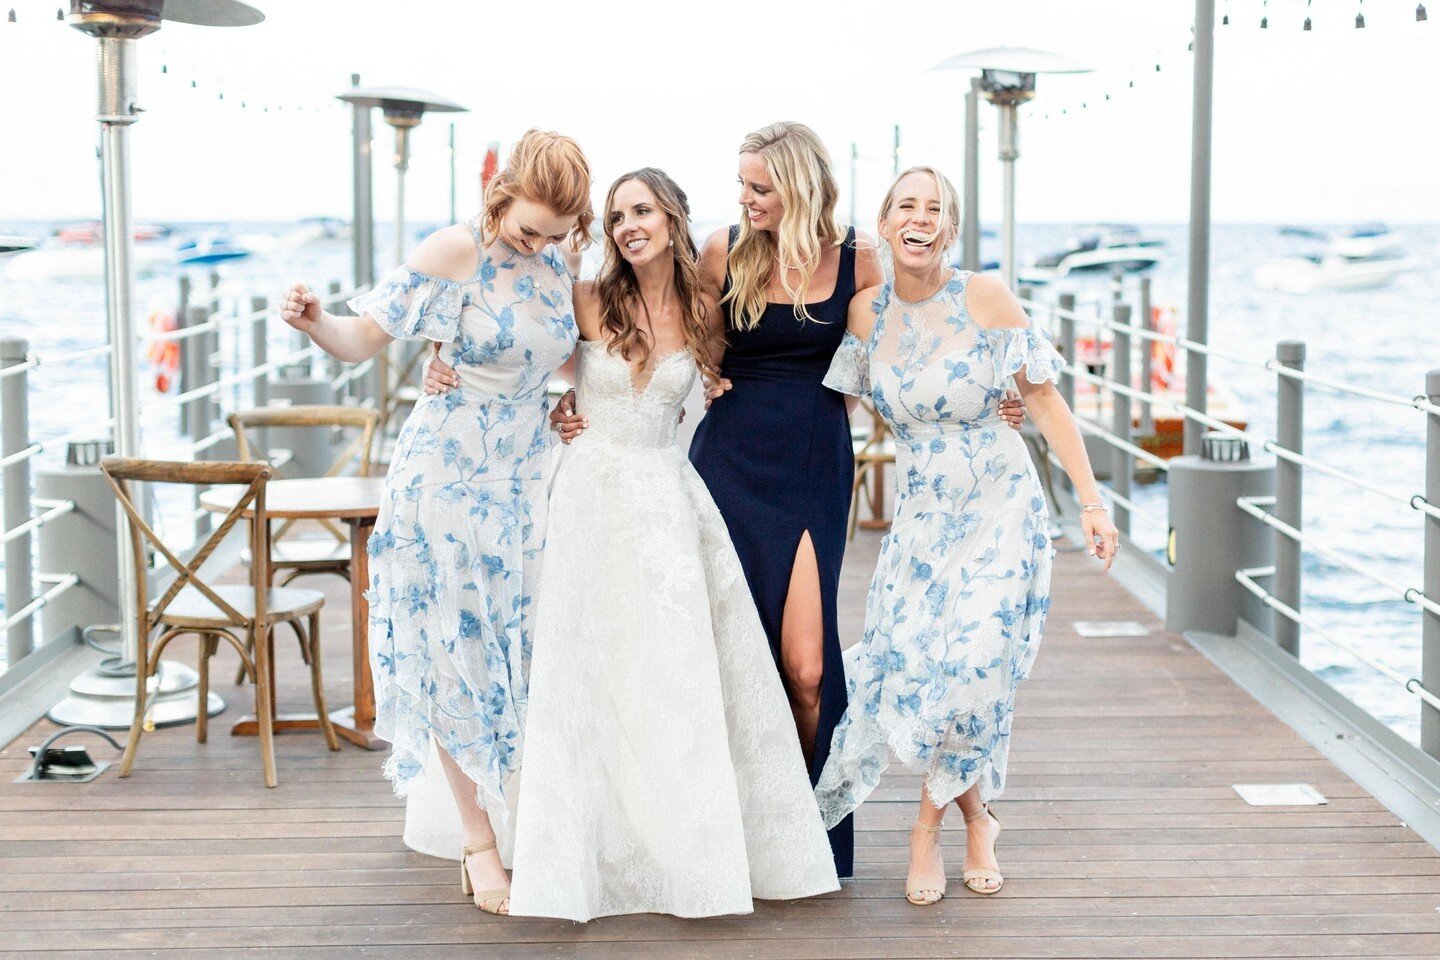 Captivating moments filled the air as K's dress was finally revealed to her bridesmaids. Their genuine reactions captured the essence of joy and excitement. Witnessing these pure expressions of happiness is truly a highlight of our work. Swipe to see